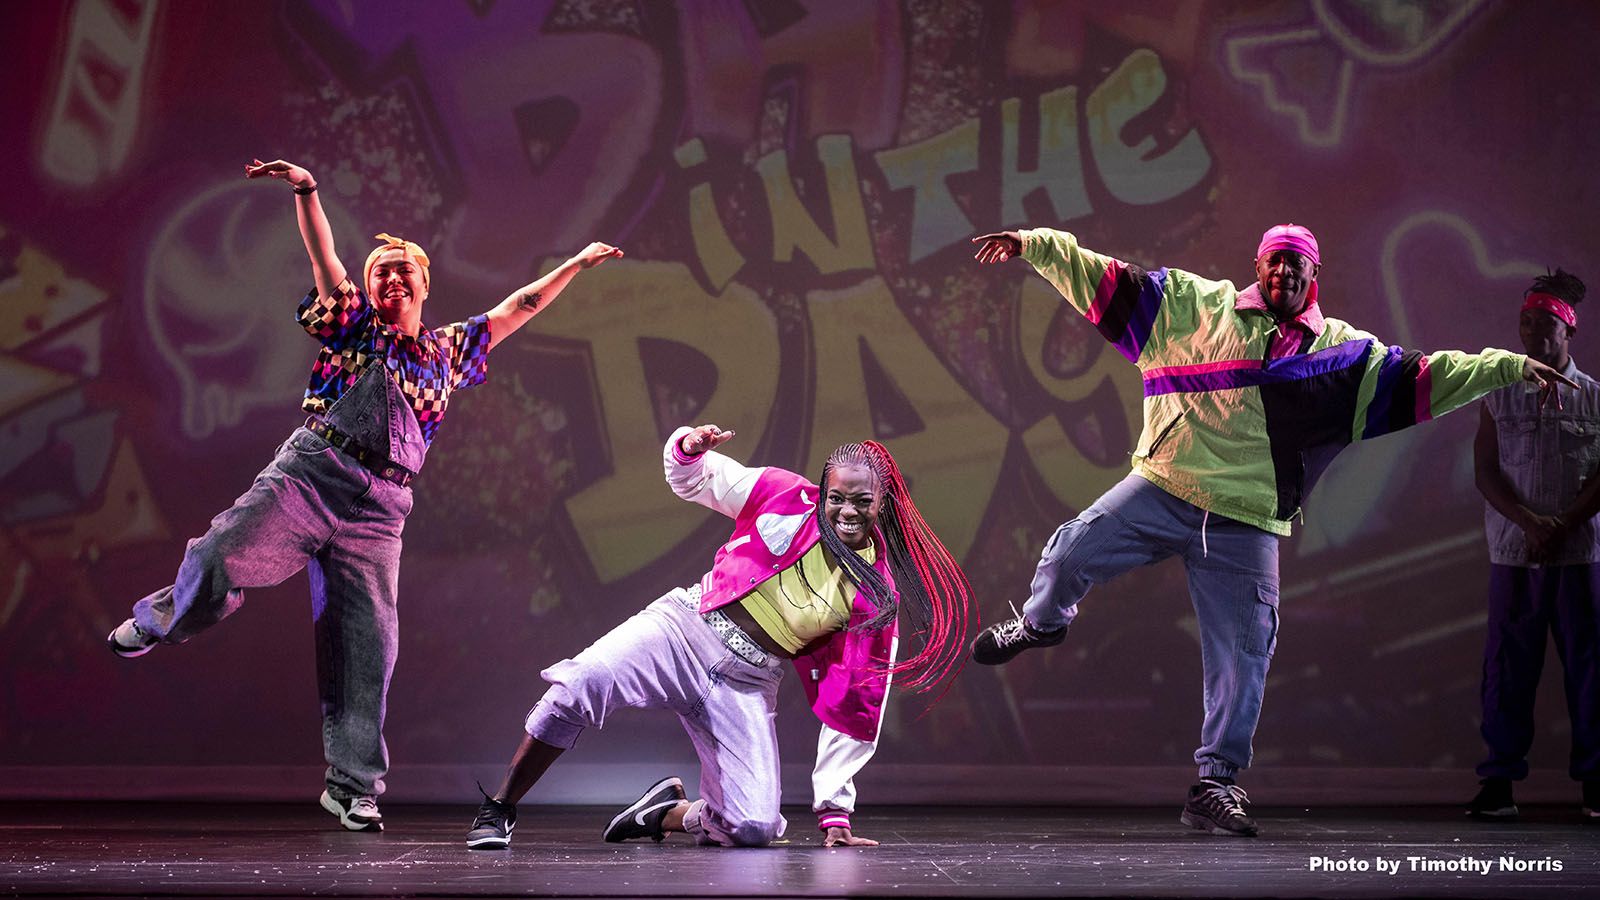 The touring production of The Hip Hop Nutcracker will stop at Embassy Theatre on Tuesday, Dec. 5.